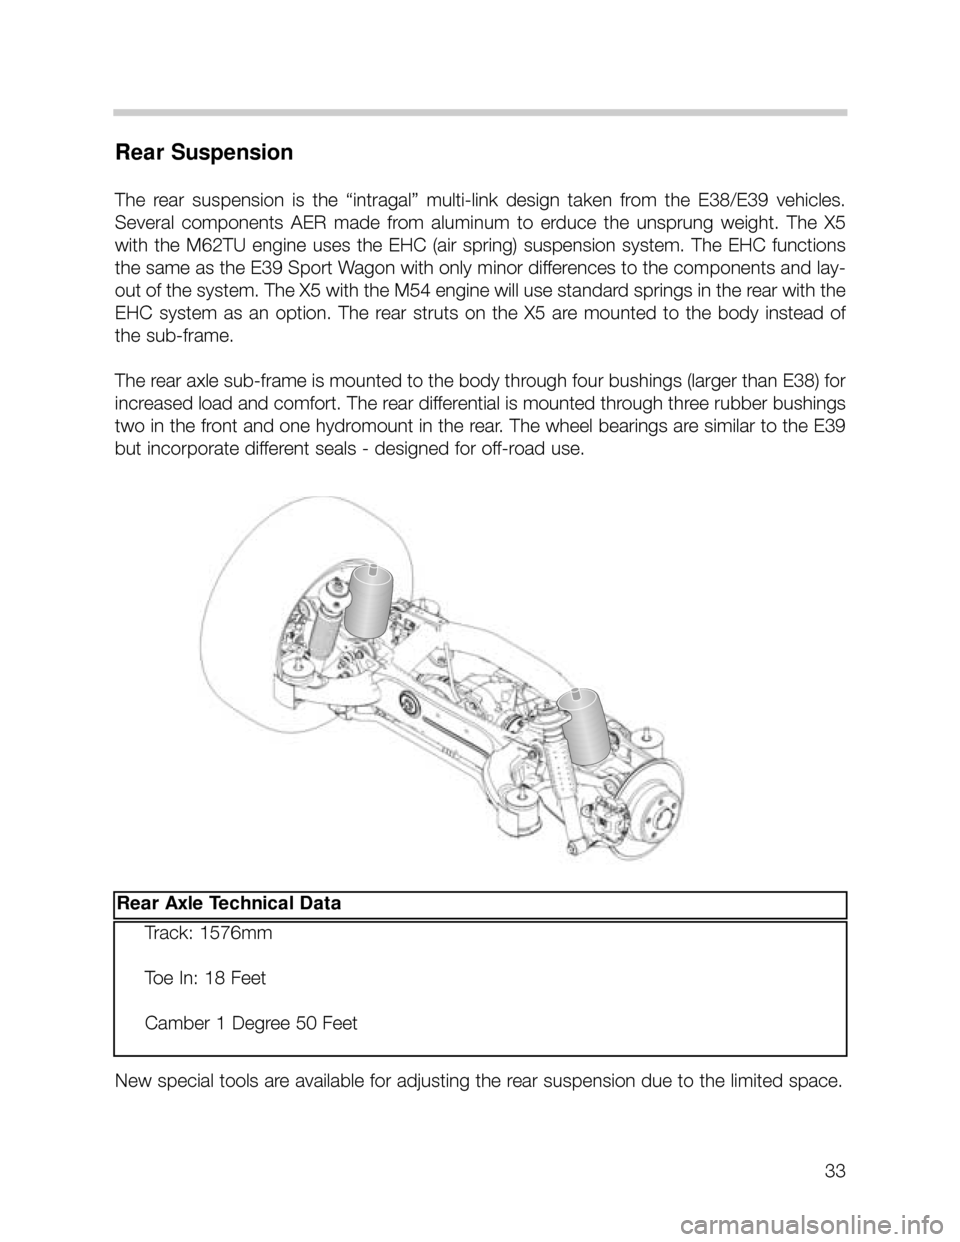 BMW X5 2004 E53 Workshop Manual 33
Rear Suspension
The  rear  suspension  is  the  “intragal”  multi-link  design  taken  from  the  E38/E39  vehicles.
Several  components  AER  made  from  aluminum  to  erduce  the  unsprung  w